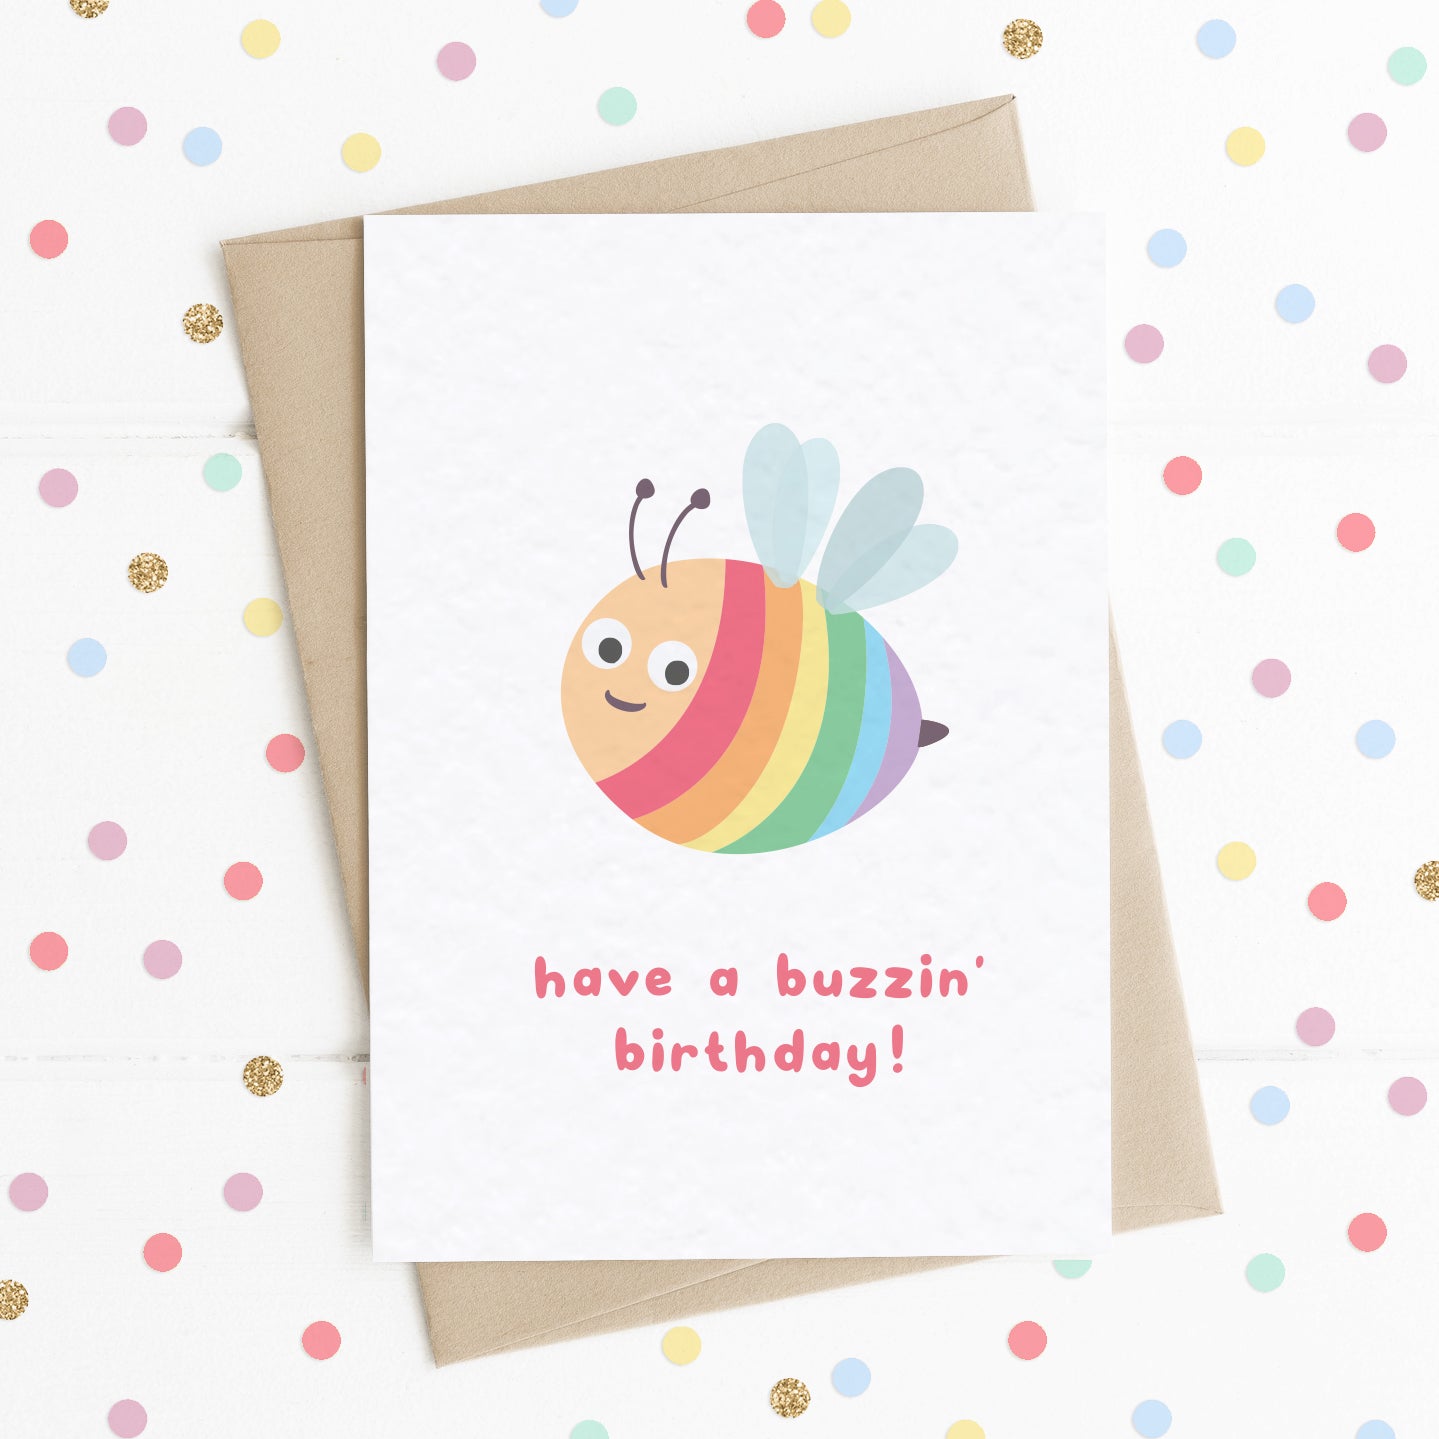 A fun birthday card with a smiling happy rainbow bee on it with the message "Have a Buzzin' Birthday".